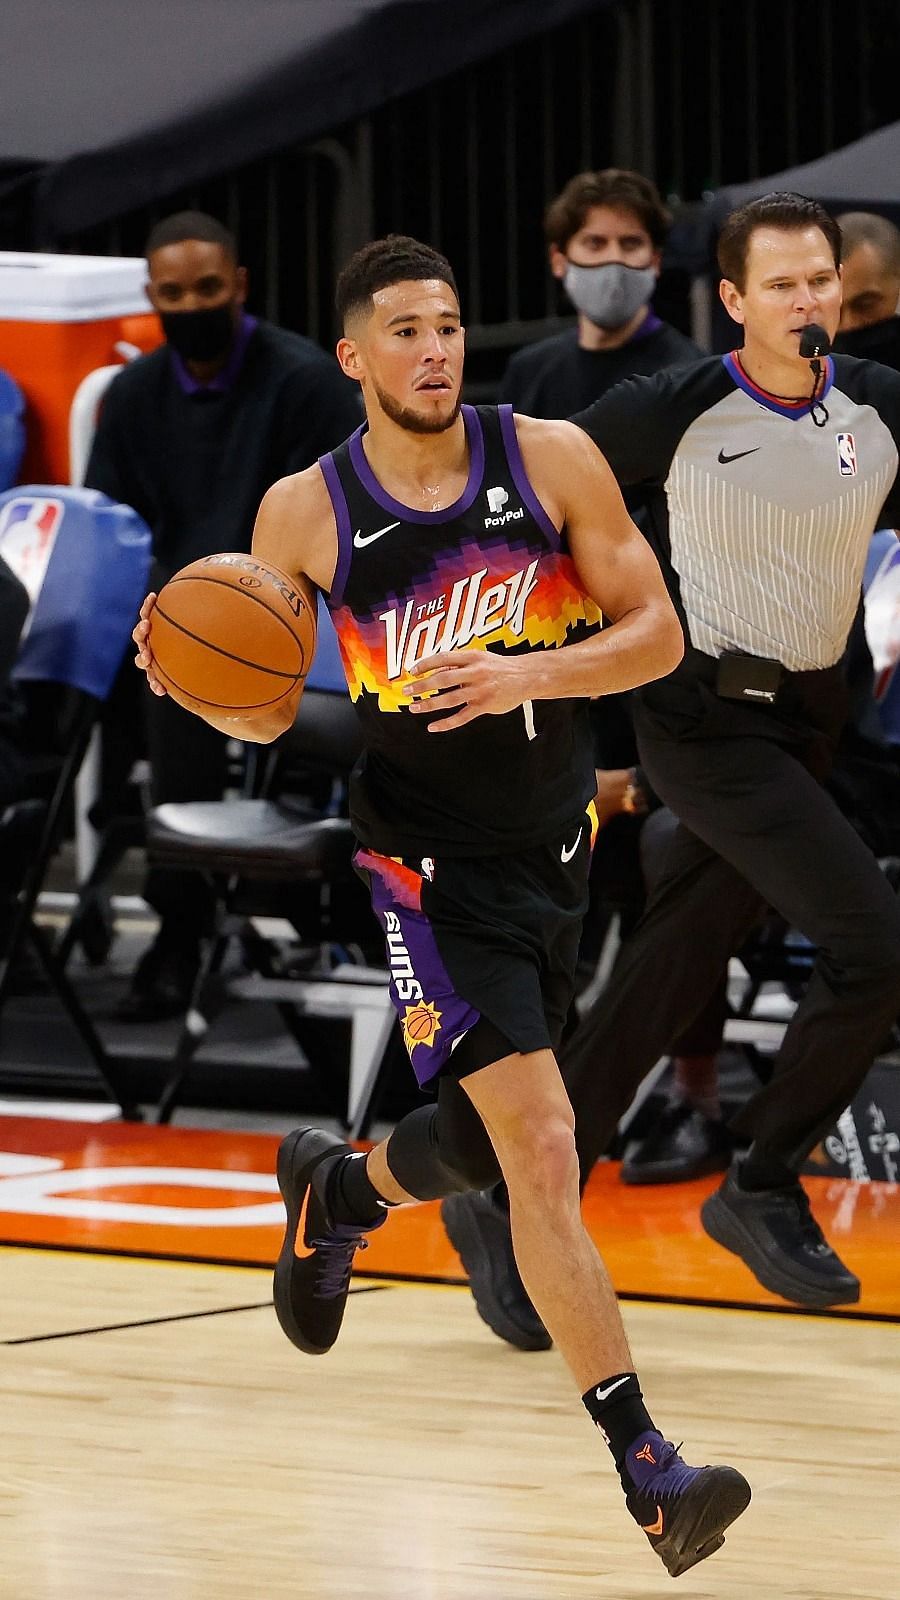 Phoenix Suns debut 'The Valley' jerseys and court against Pelicans